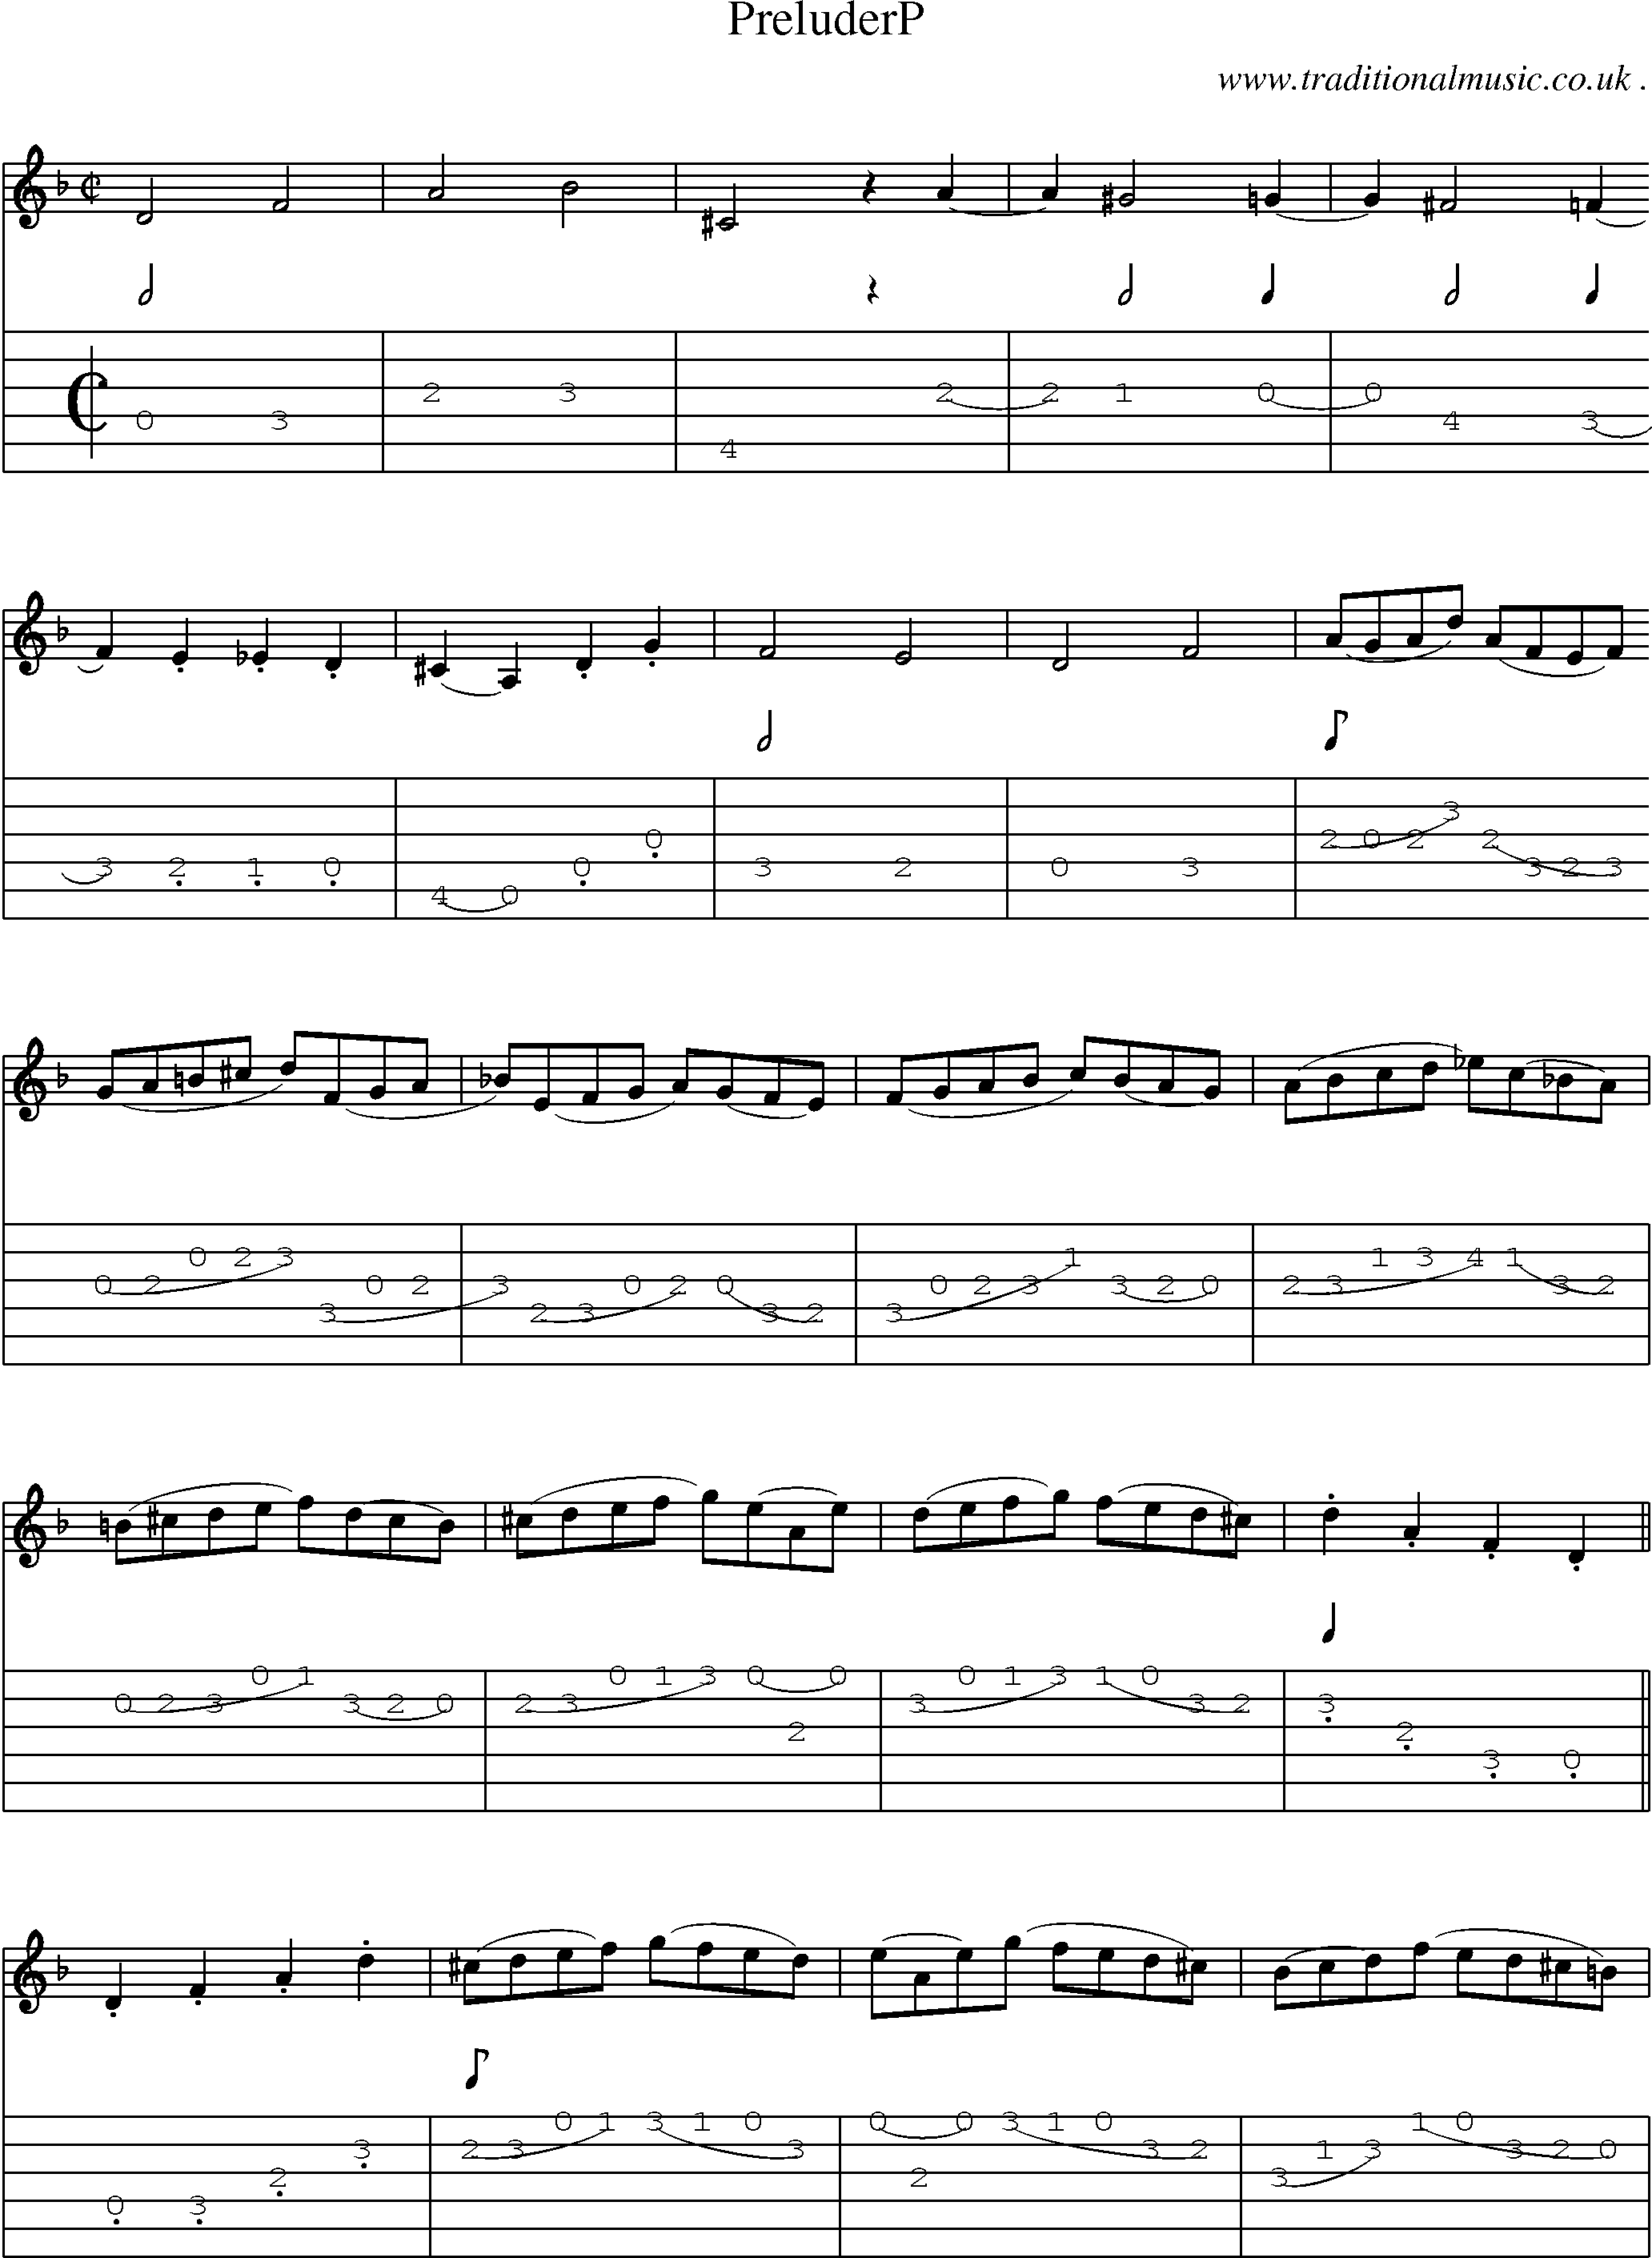 Sheet-Music and Guitar Tabs for Preluderp